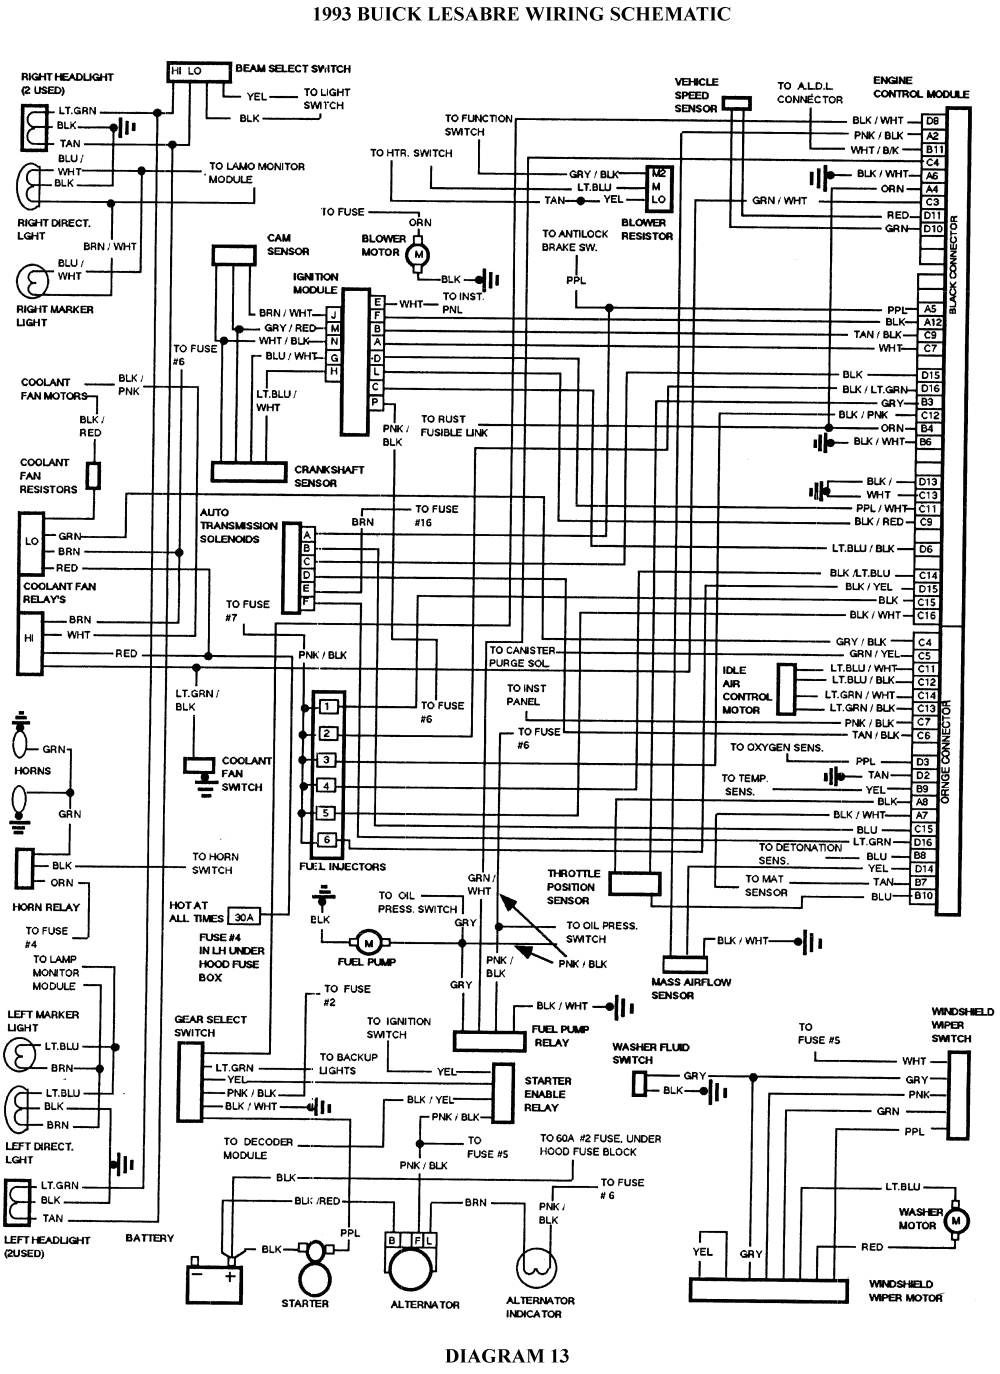 buick lesabre wiring schematic click image to see an enlarged view fig